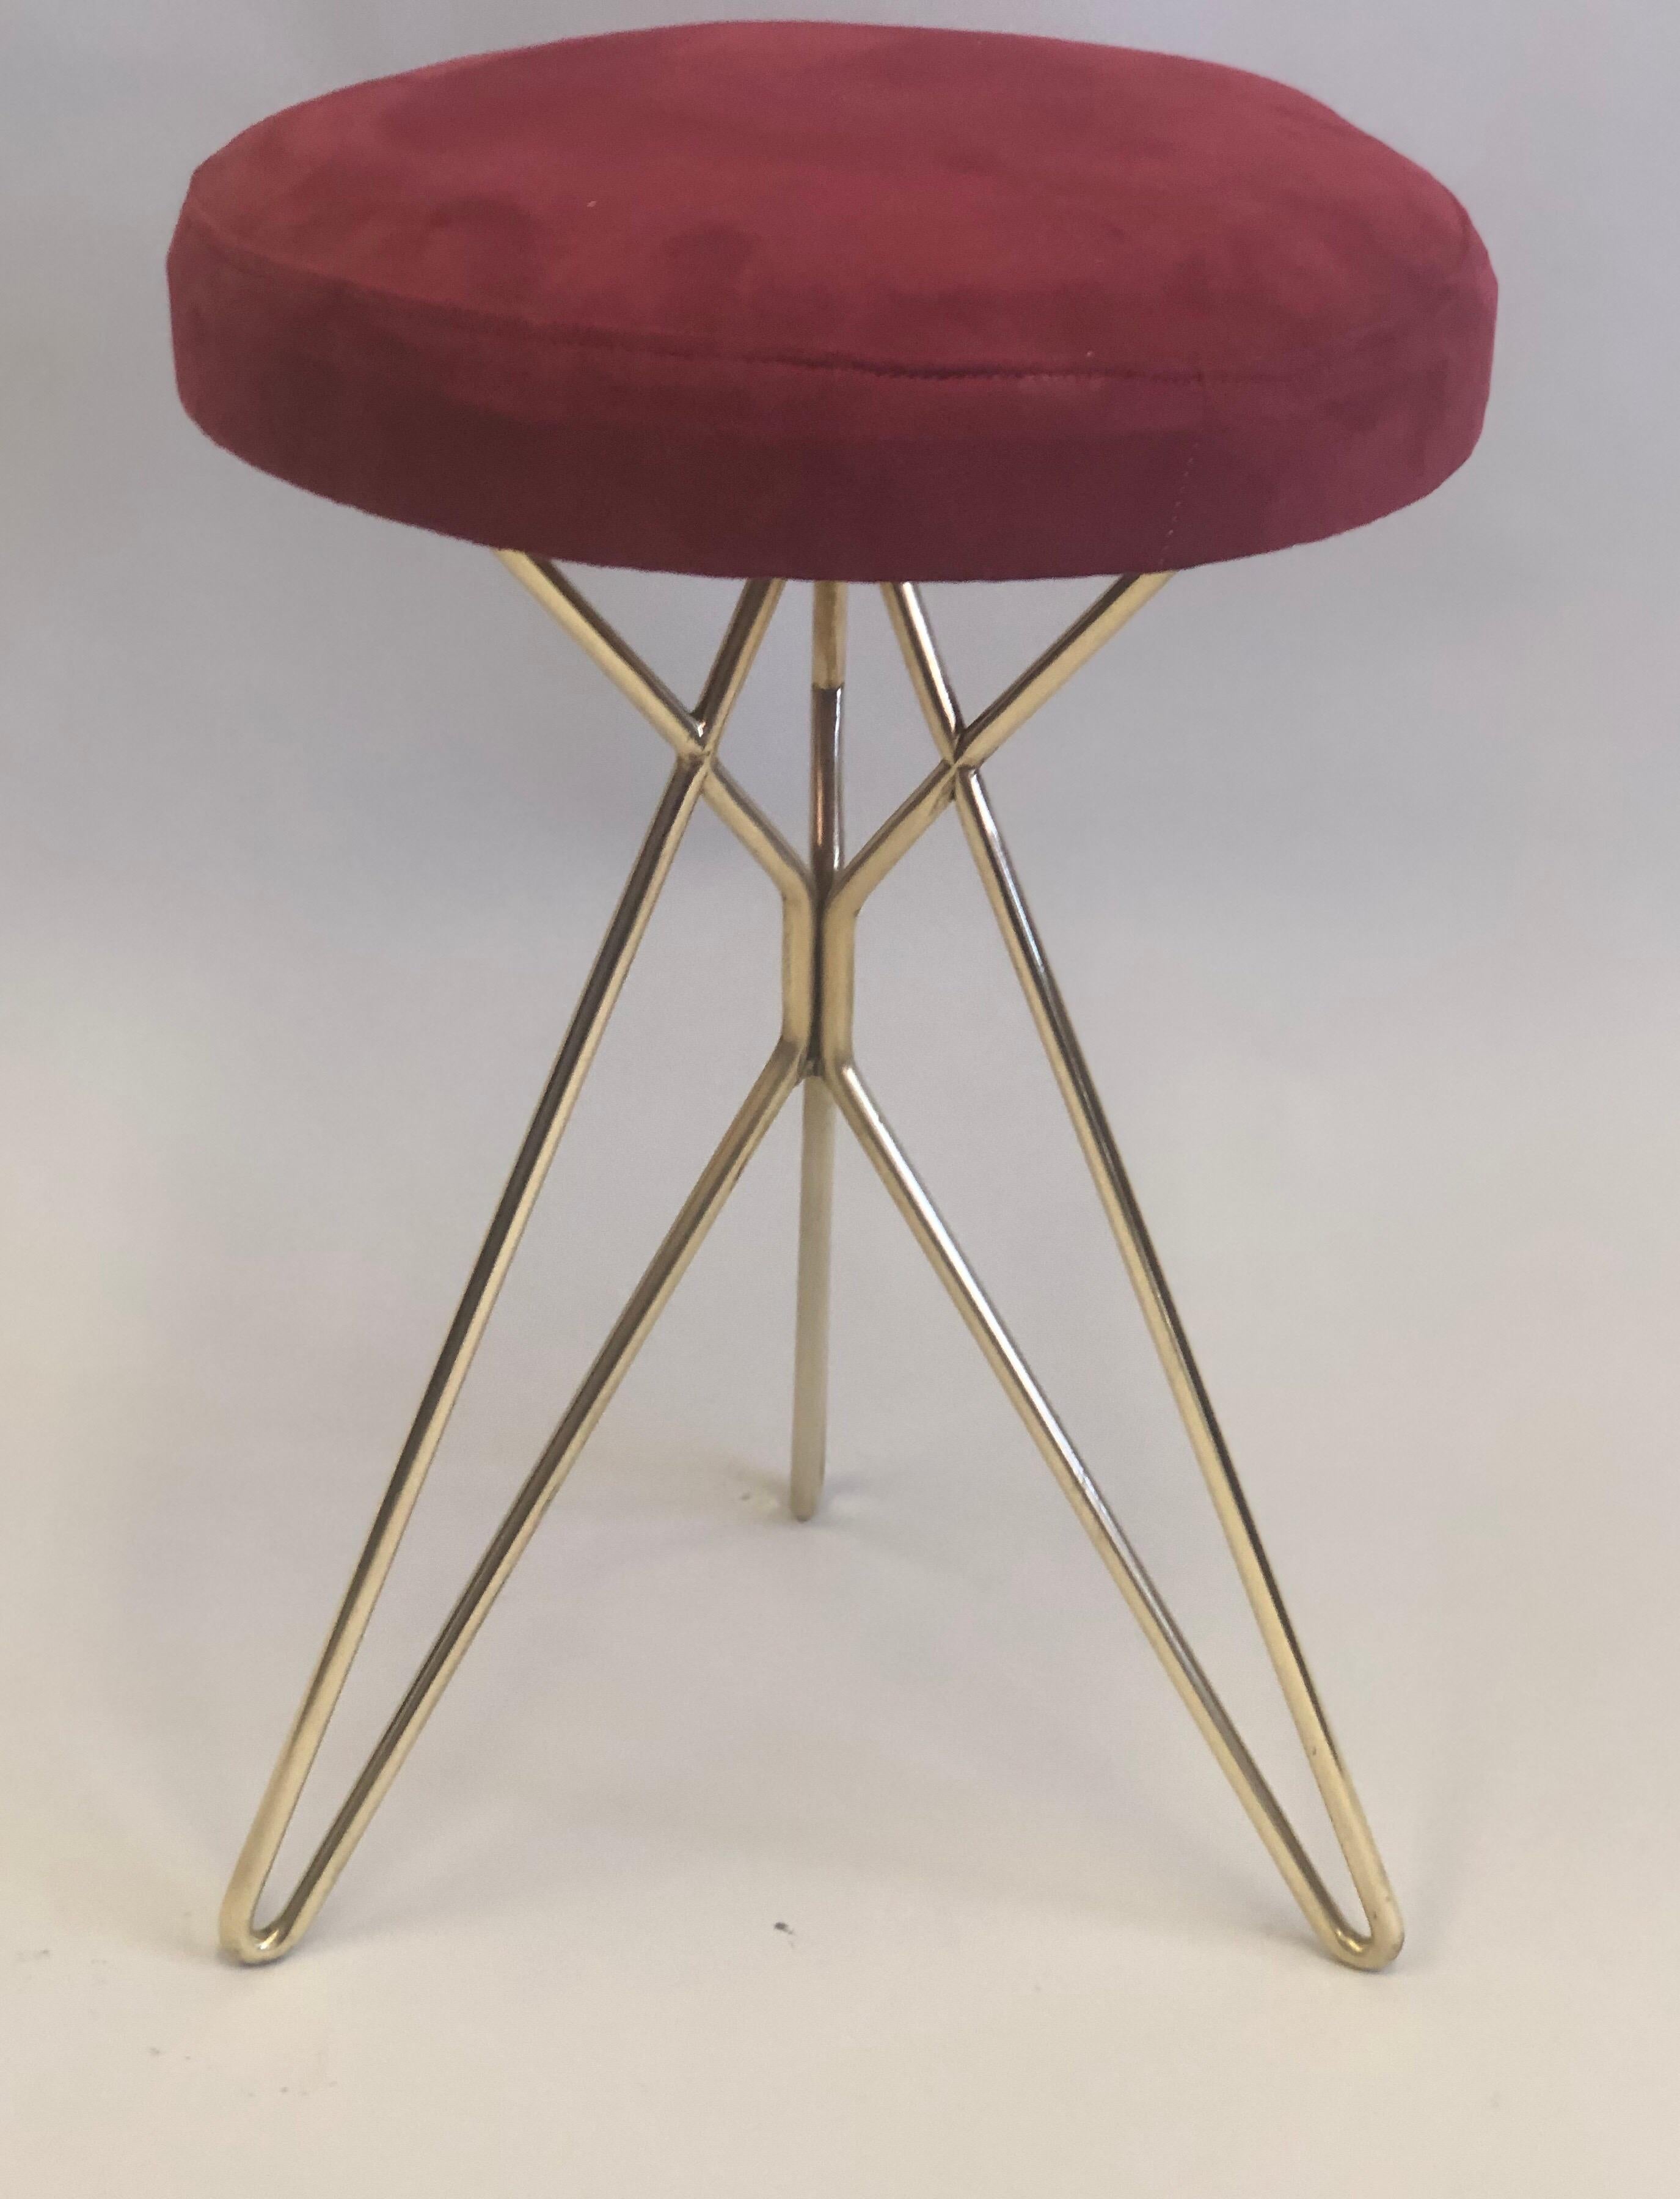 Pair of Italian Midcentury Brass Stools Attributed to Ico Parisi, 1952 For Sale 1